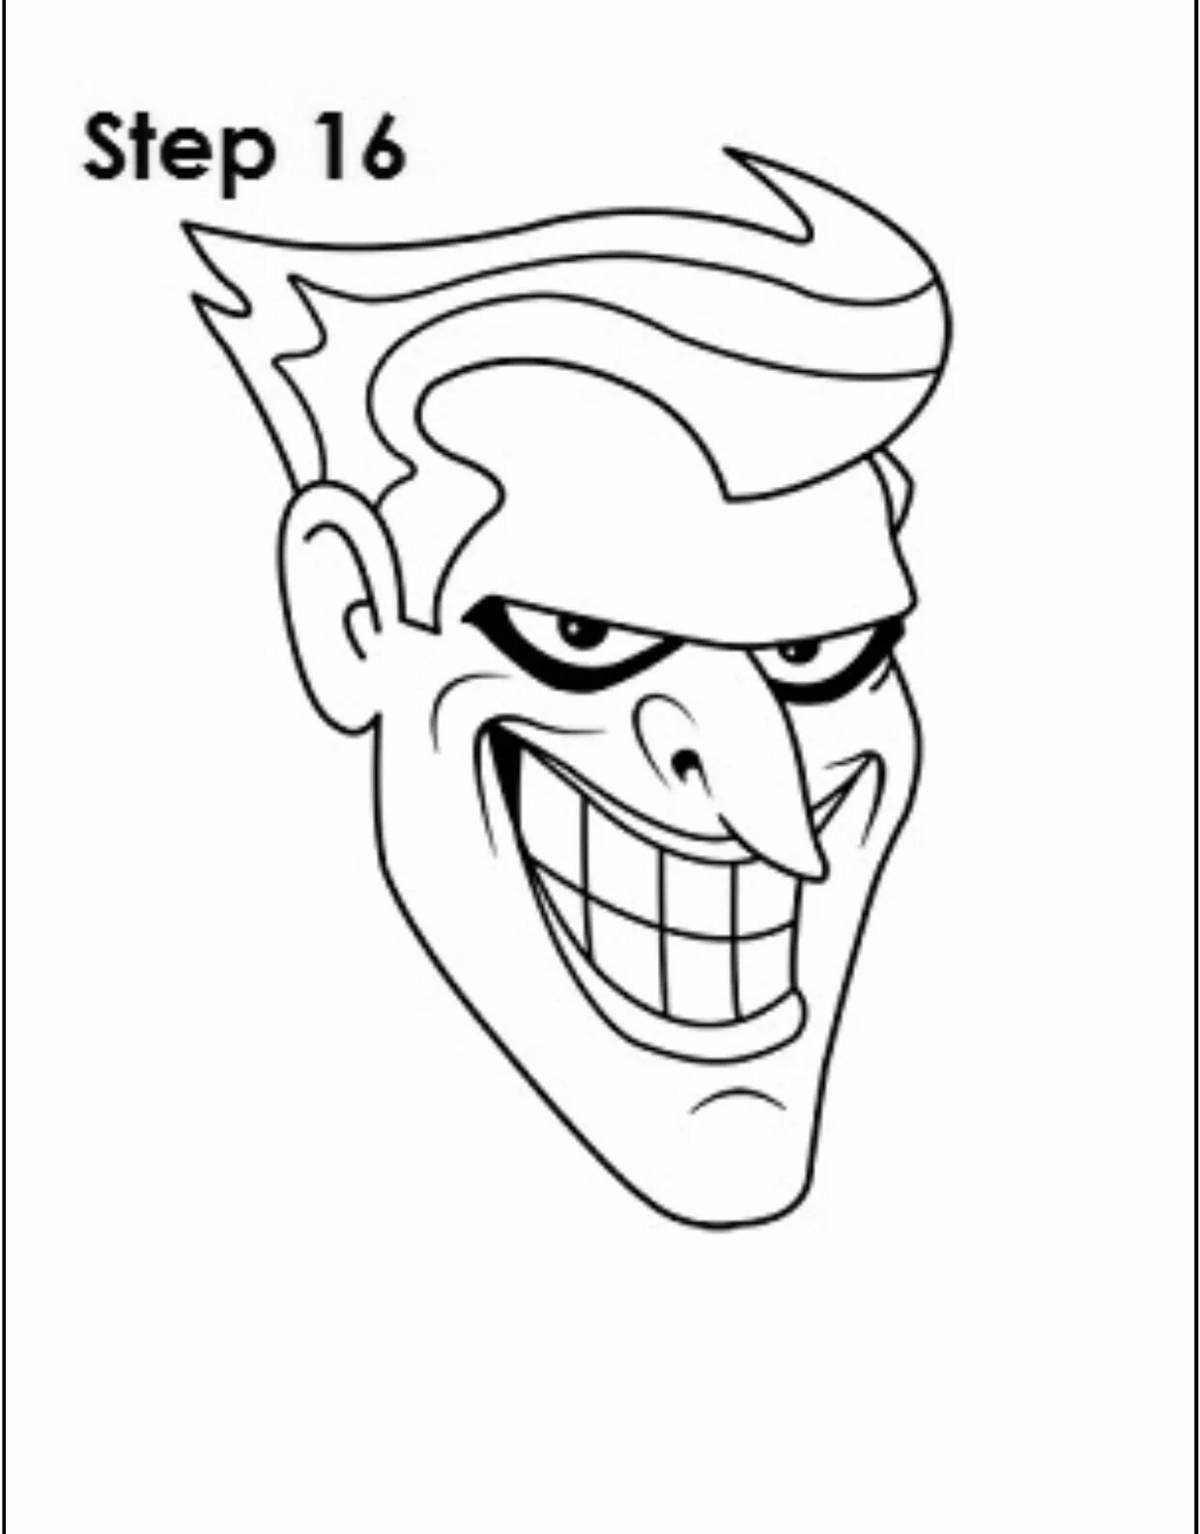 Colorful joker face coloring page